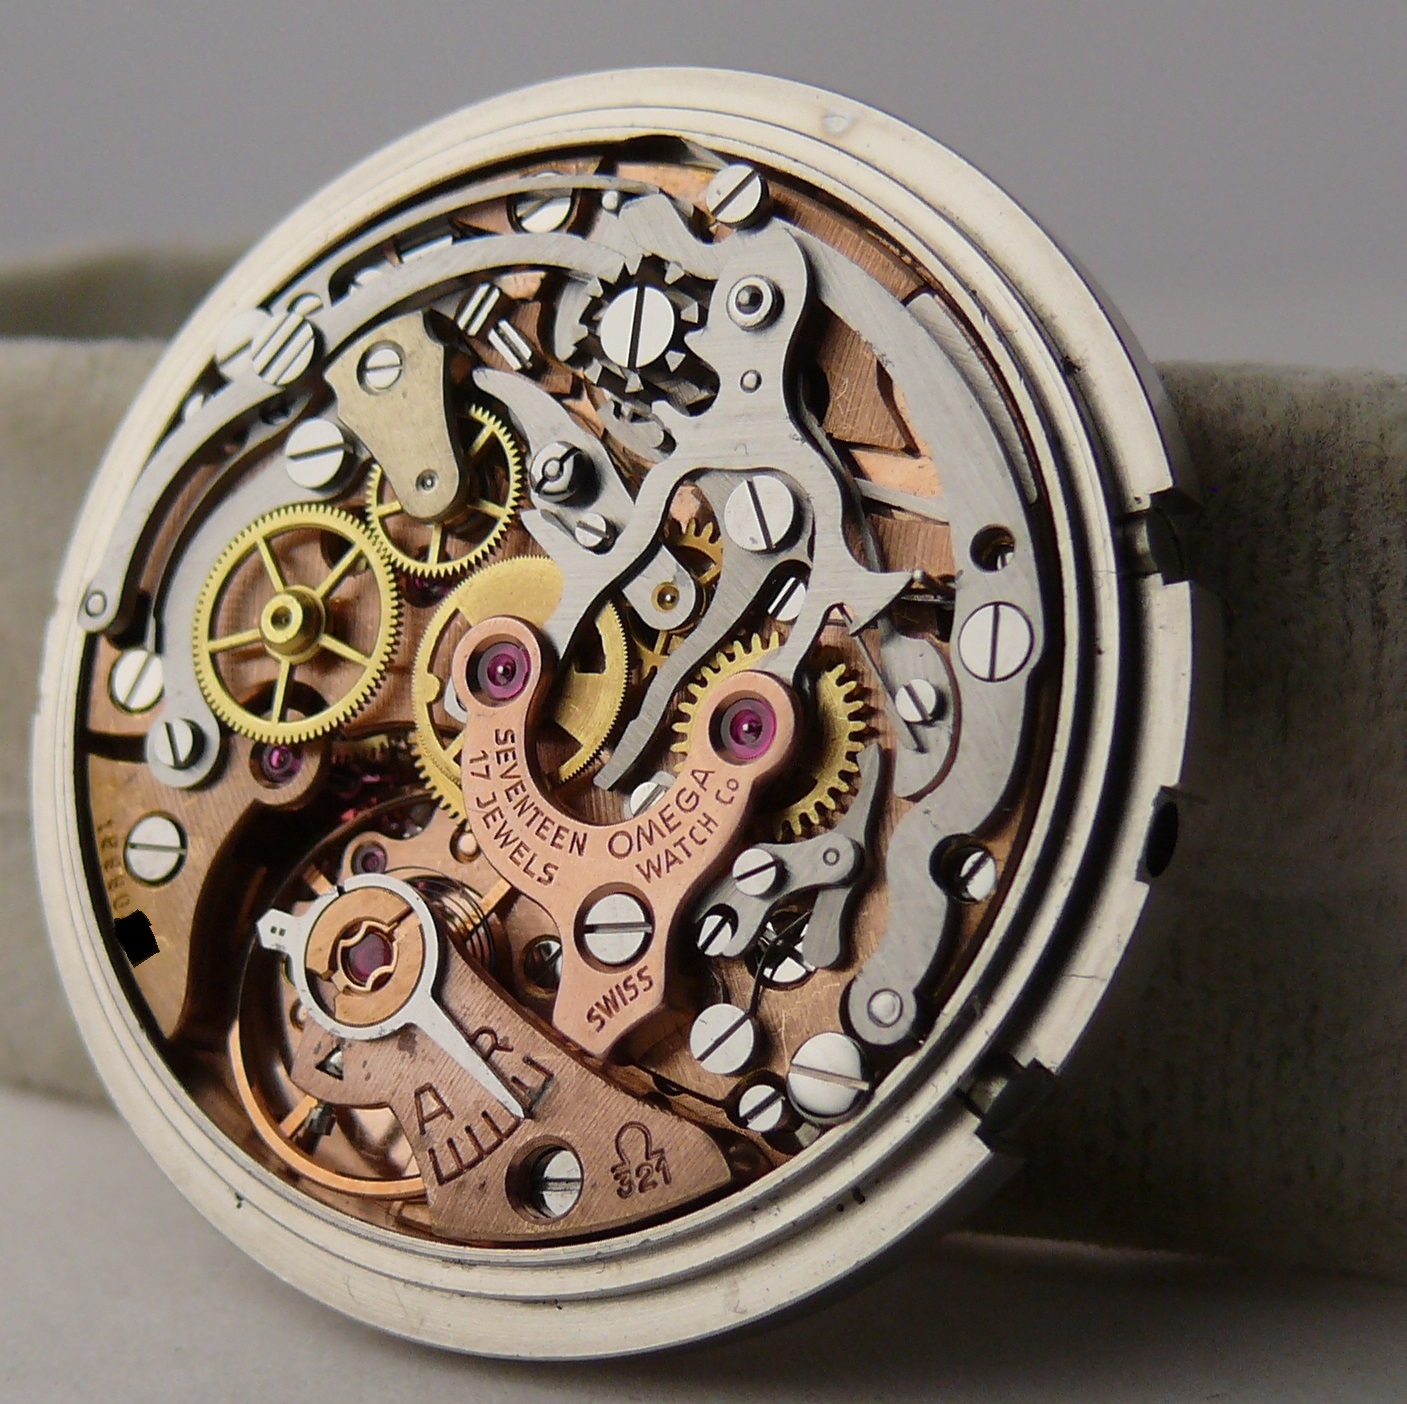 1957 Vintage Omega Speedmaster 2915-1 movement calibre no 321. Movement serial is 15,996,xxx. This - Image 3 of 5